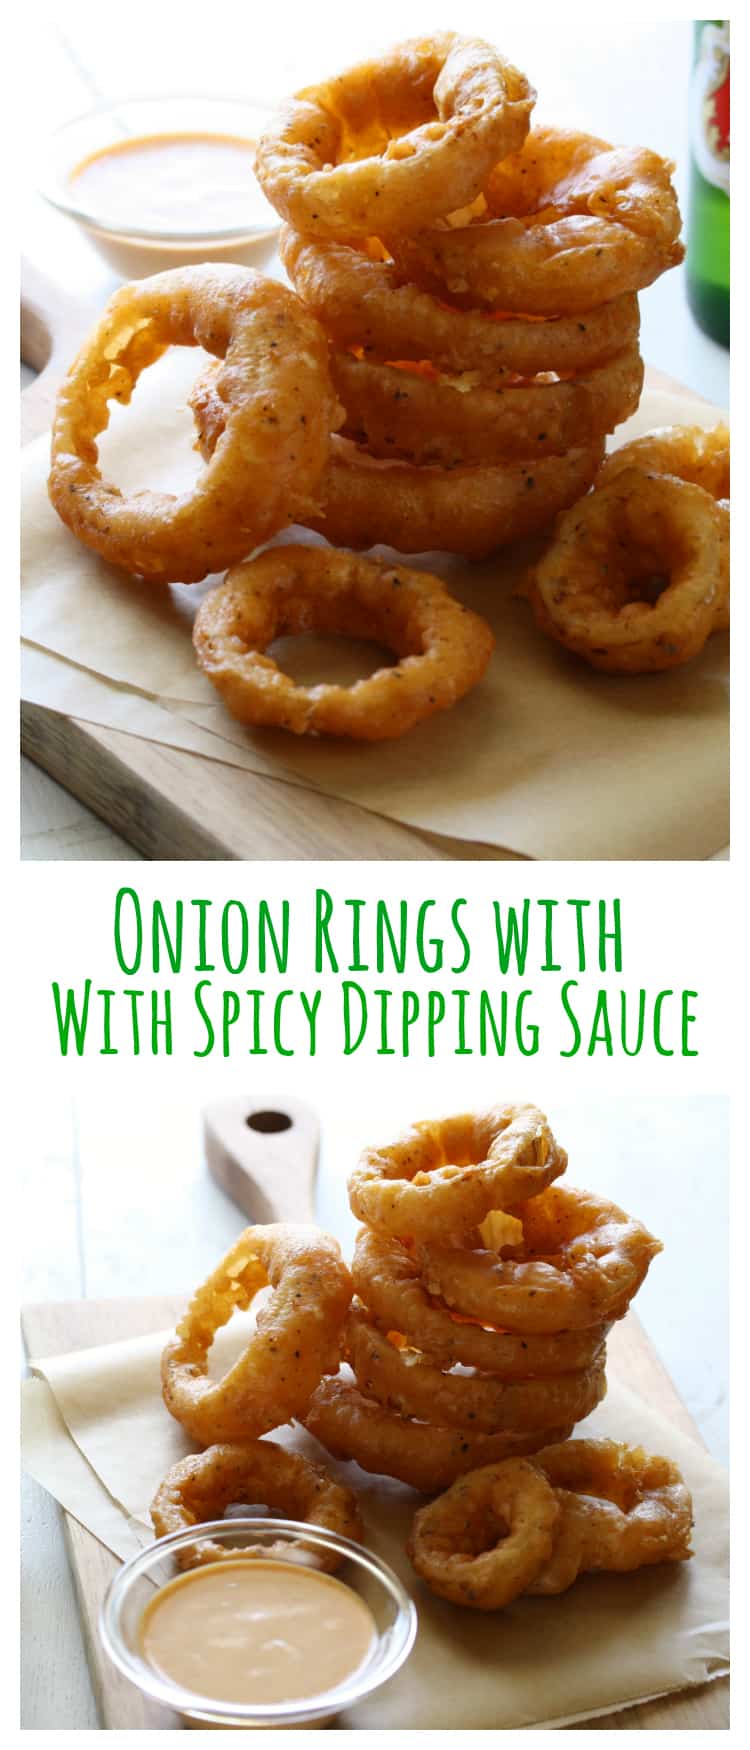 Onion Rings with Spicy Dipping Sauce - Saving Room for Dessert